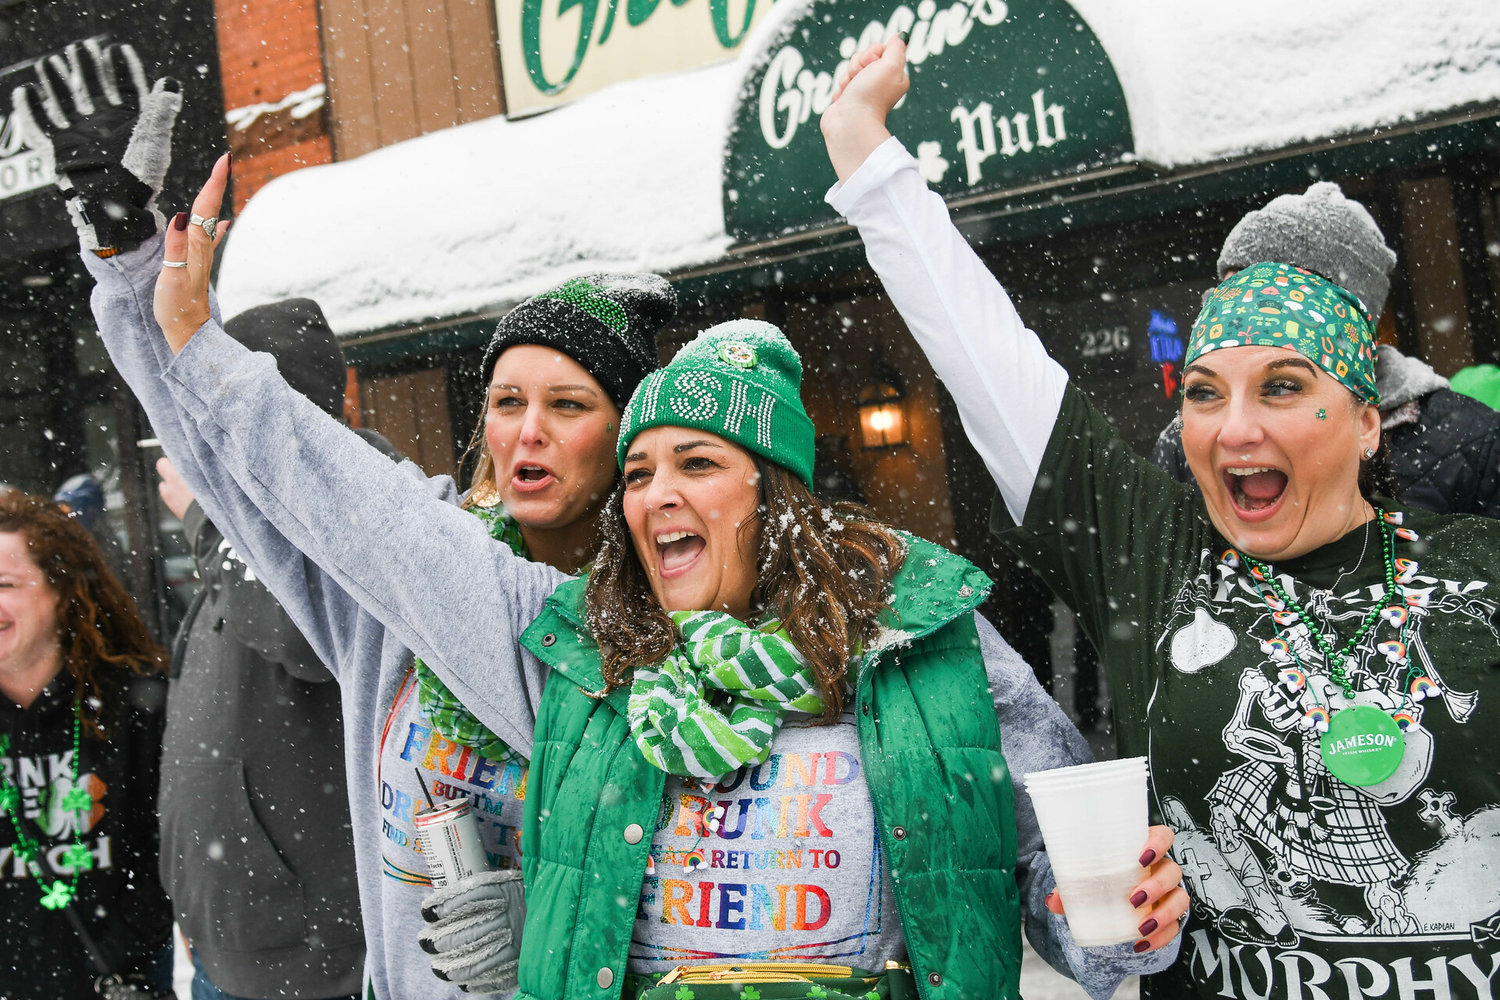 Parade watchers celebrate St. Patrick’s Day in March 2022 along Genesee Street in Utica. The Utica St. Patrick’s Day Parade returns at 10 a.m. March 11, starting at Oneida Square.